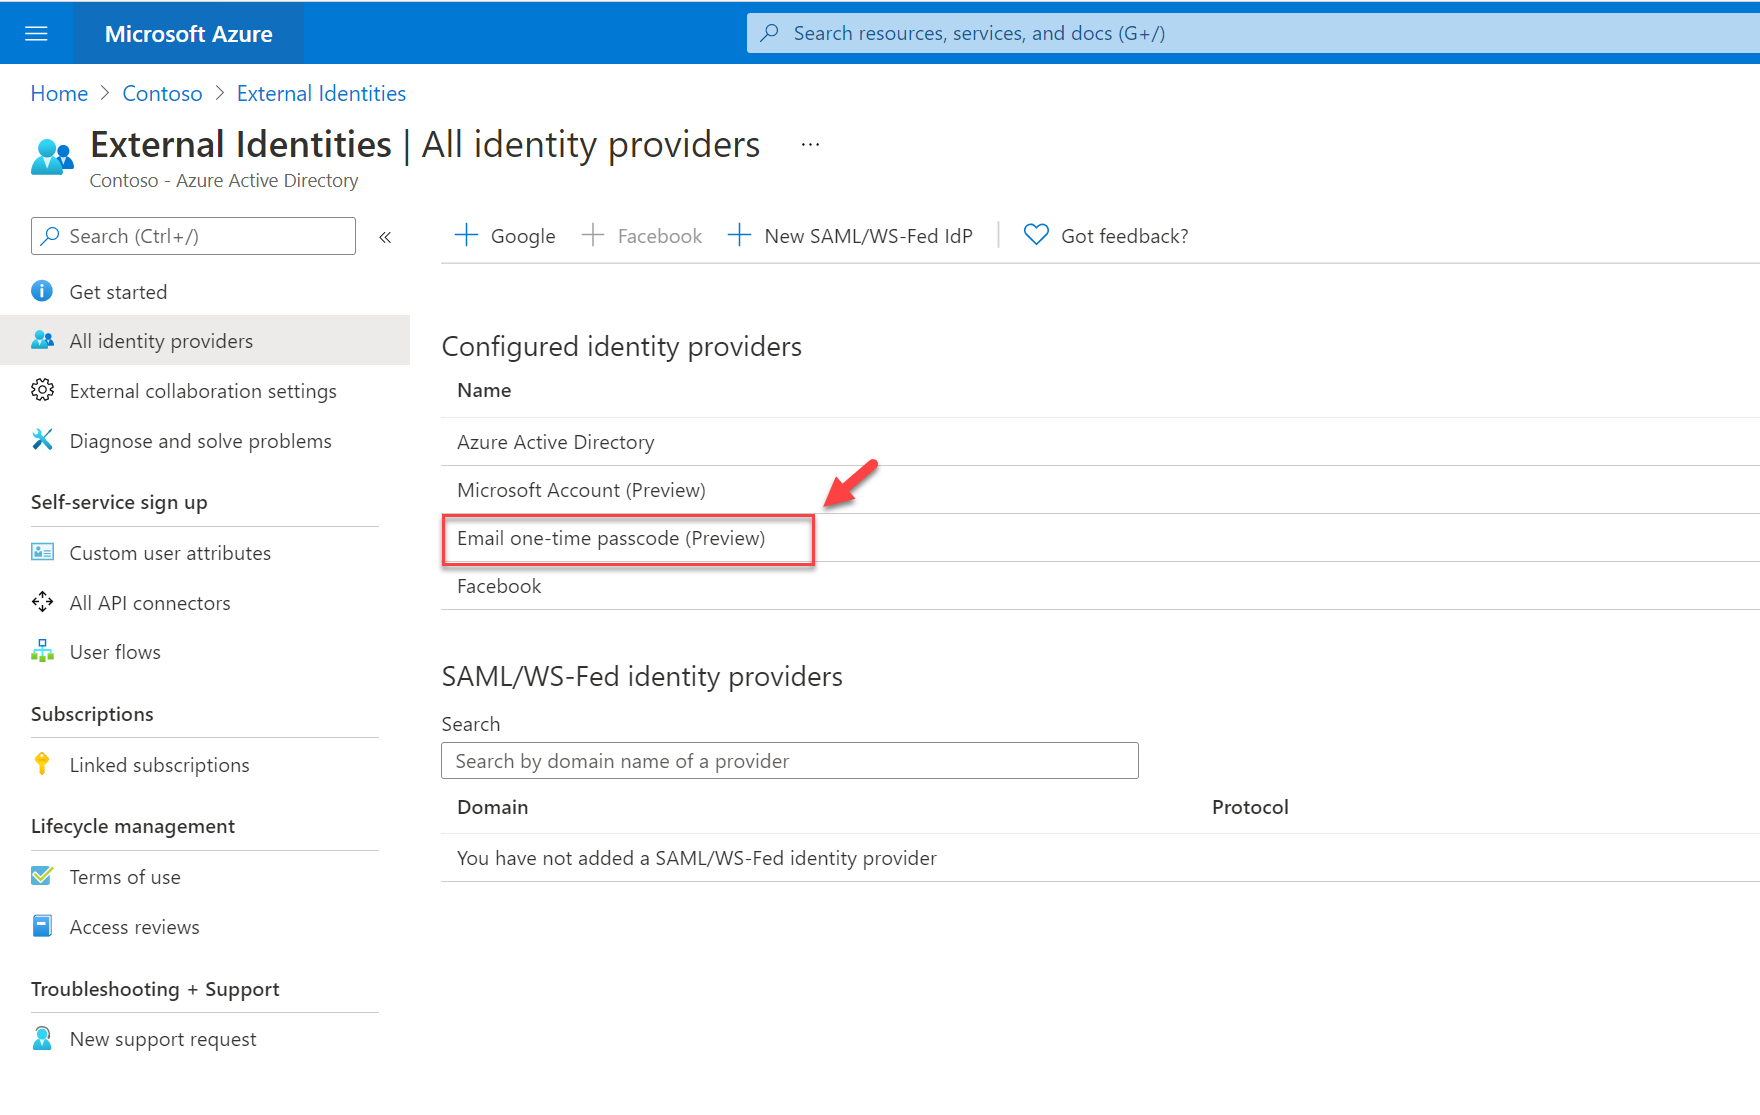 Azure AD Email one-time passcode (Preview) Option